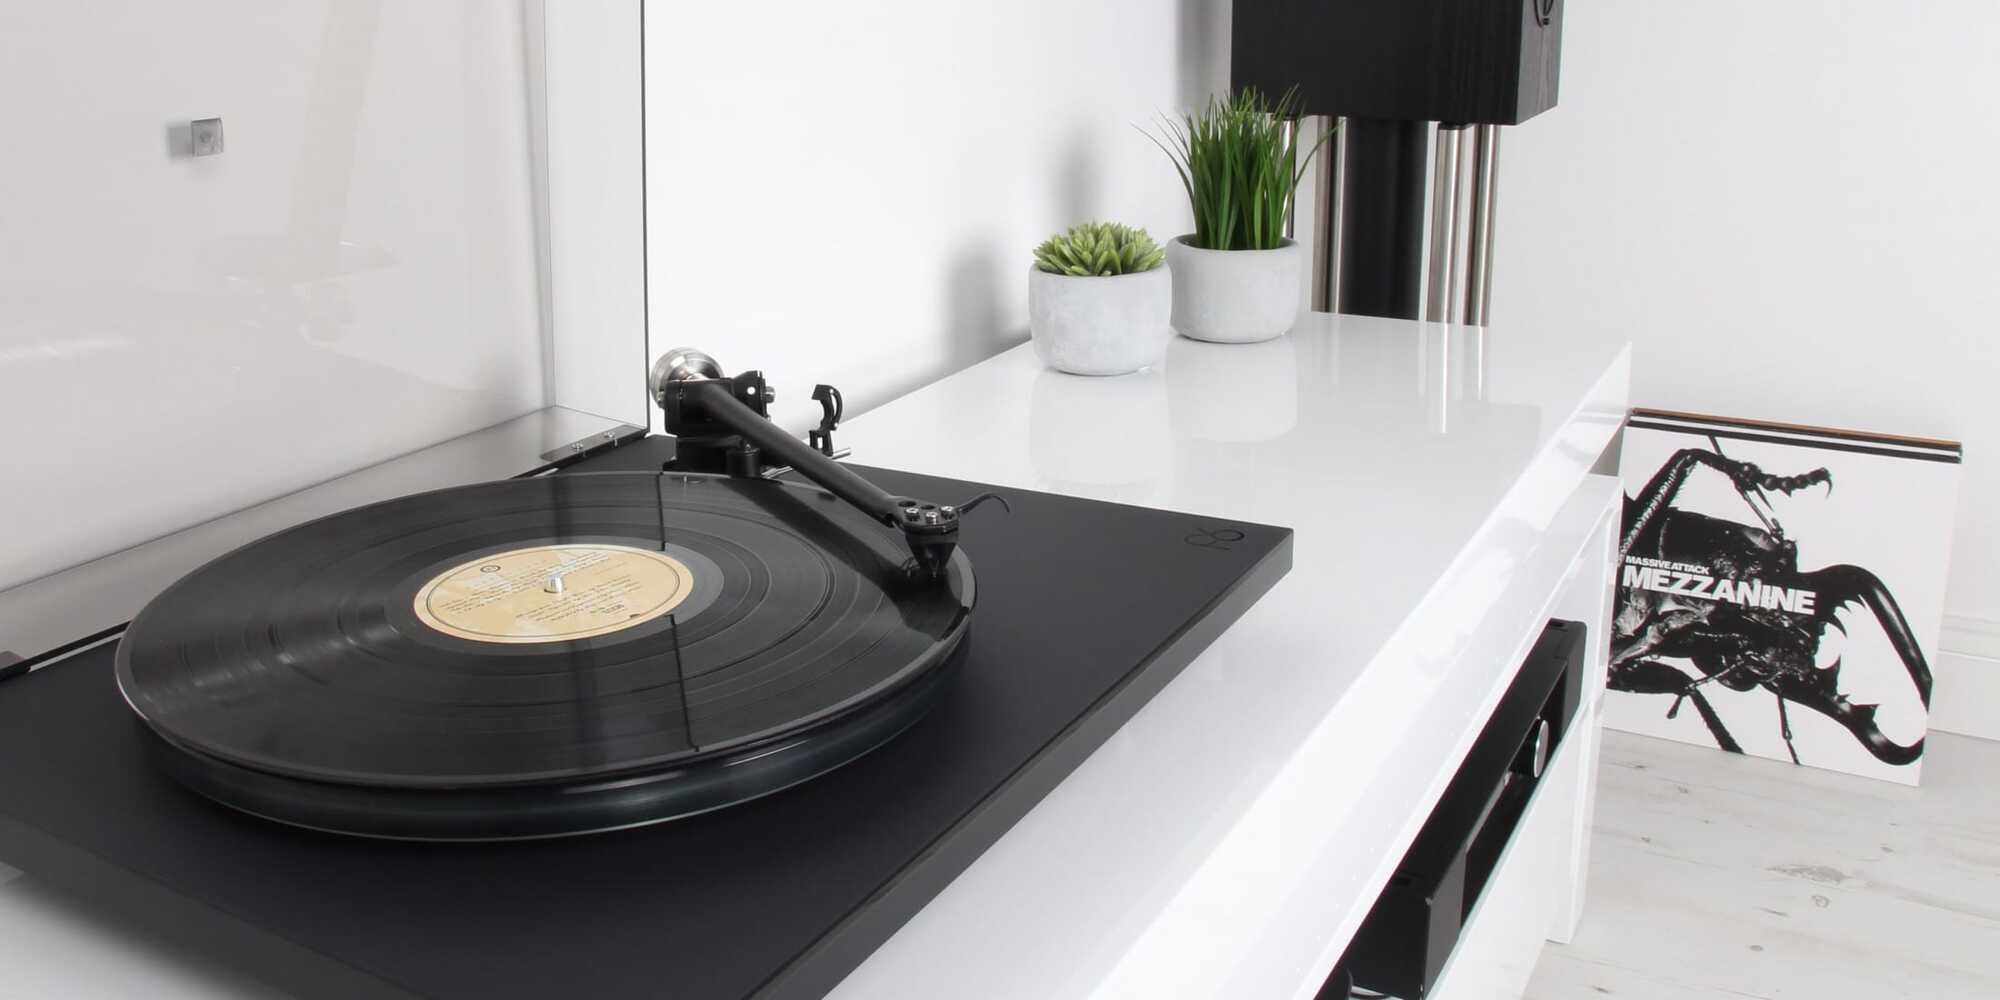 Rega - The turntable for all music lovers